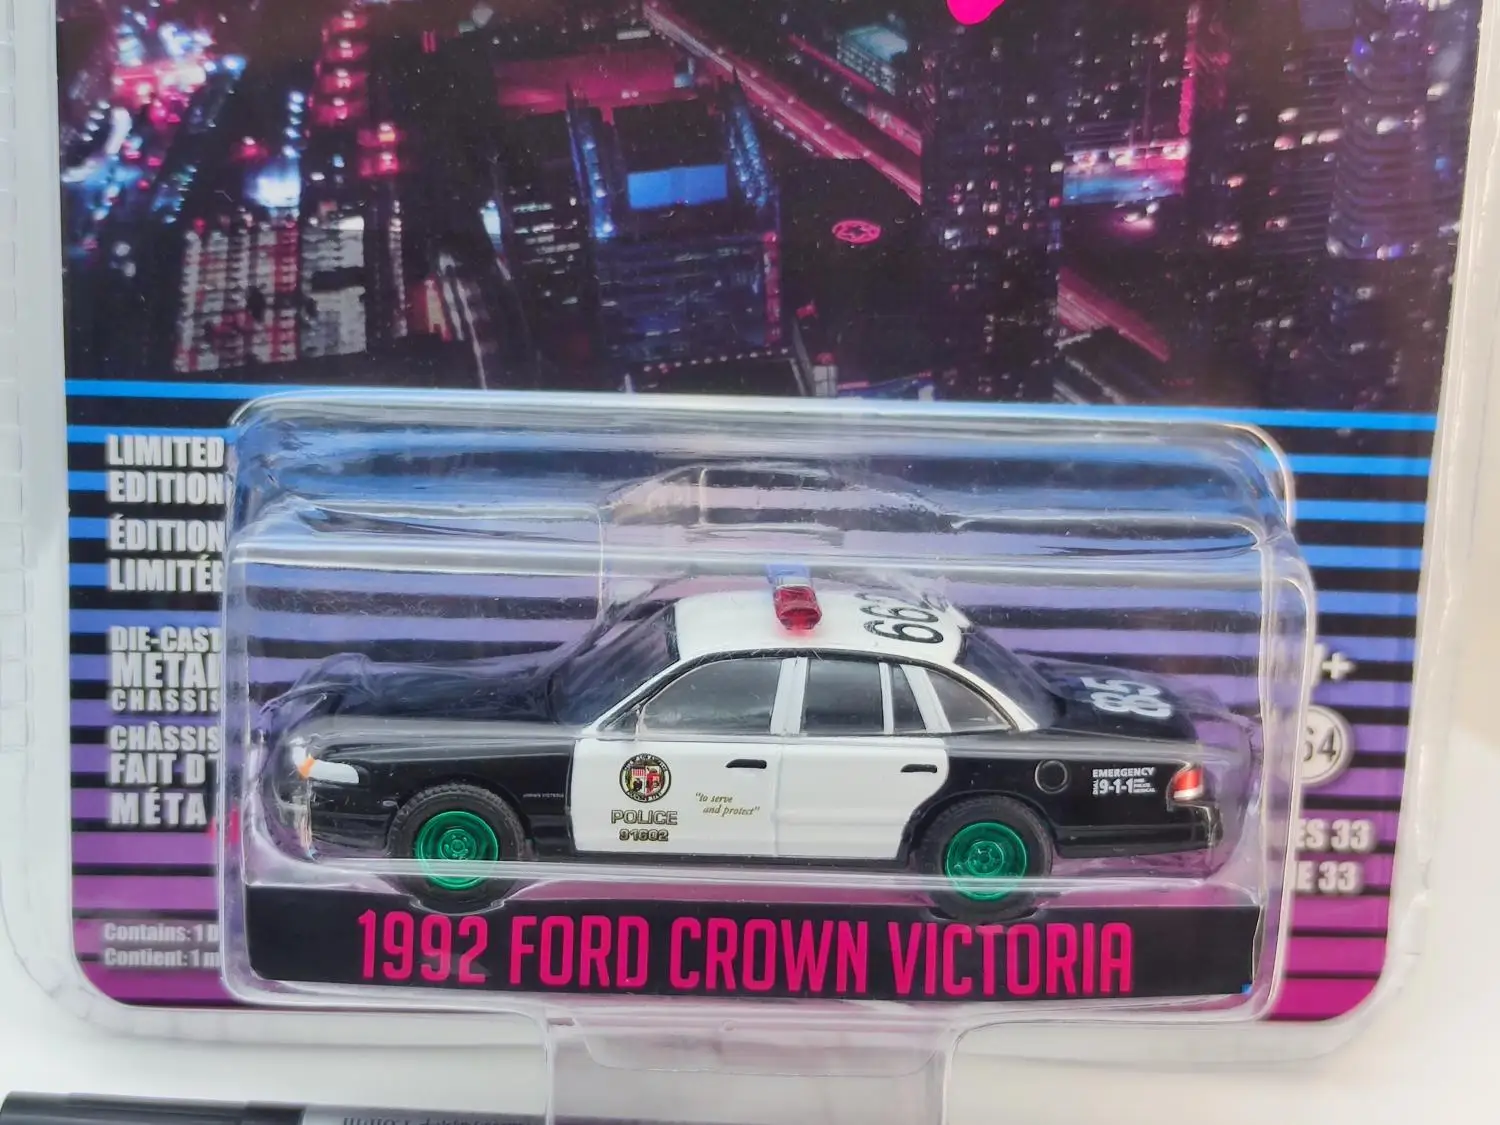 Drive 1992 Ford Crown Victoria 1:64 Scale Greenlight 44930D